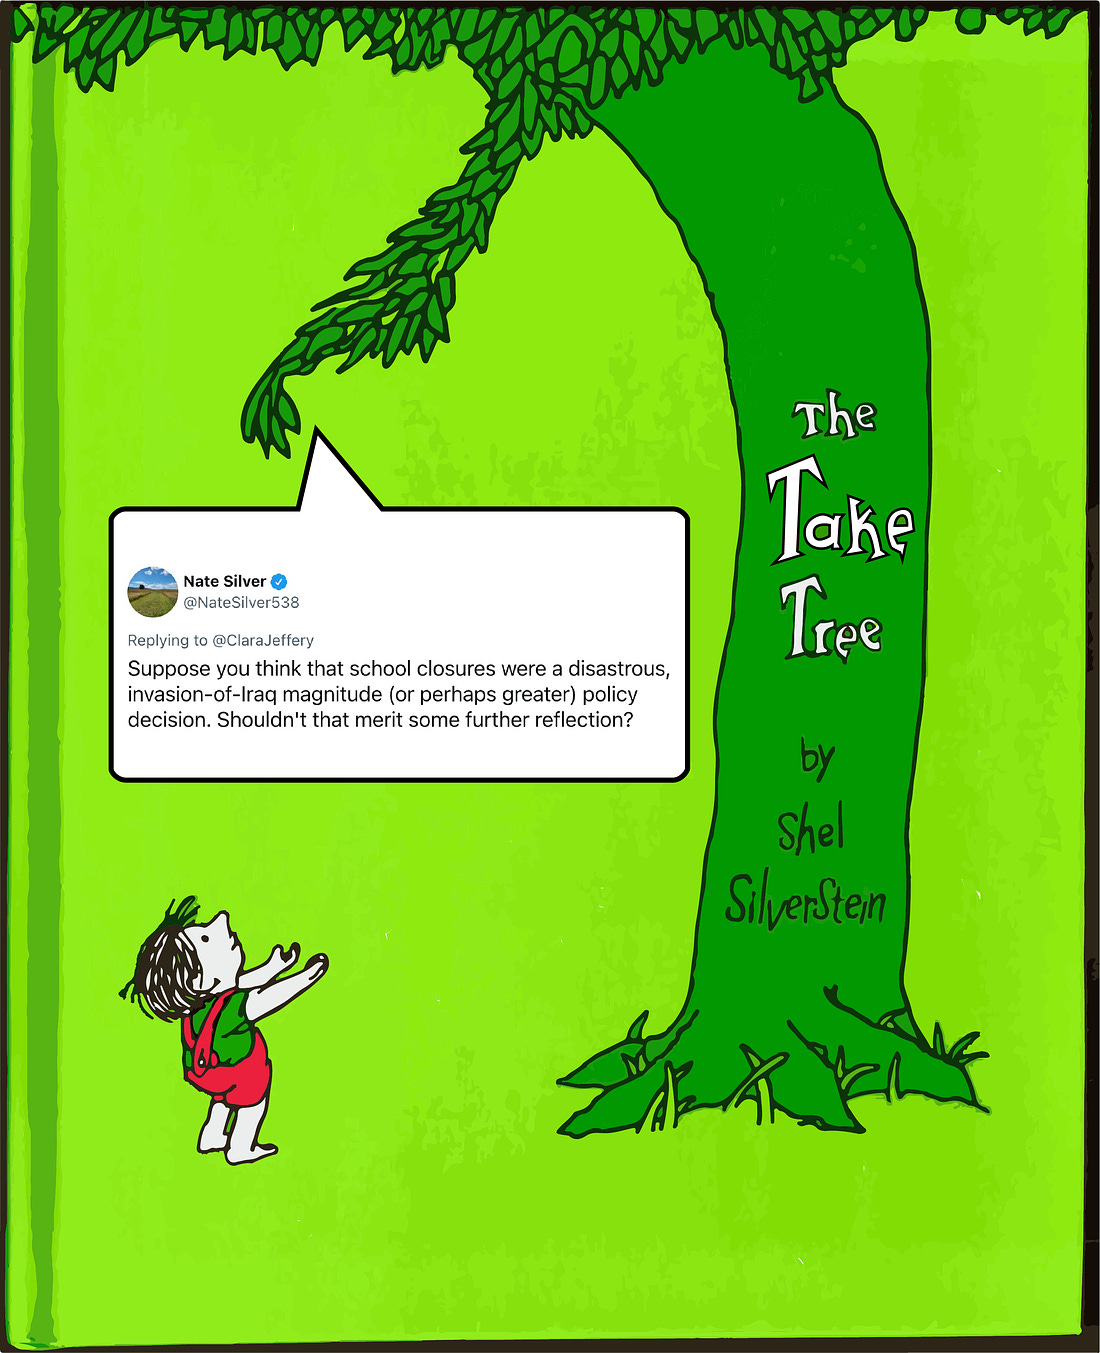 Shel Silverstein’s “The Giving Tree” cover except it’s The Take Tree, and it‘s handing the little boy a tweet by Nate Silver, replying to Clara Jeffery, that reads: “Suppose you think that school closures were a disastrous, invasion-of-Iraq magnitude (or perhaps greater) policy decision. Shouldn't that merit some further reflection?” Yes, he’s saying that Zoom school was worse than the Iraq War.